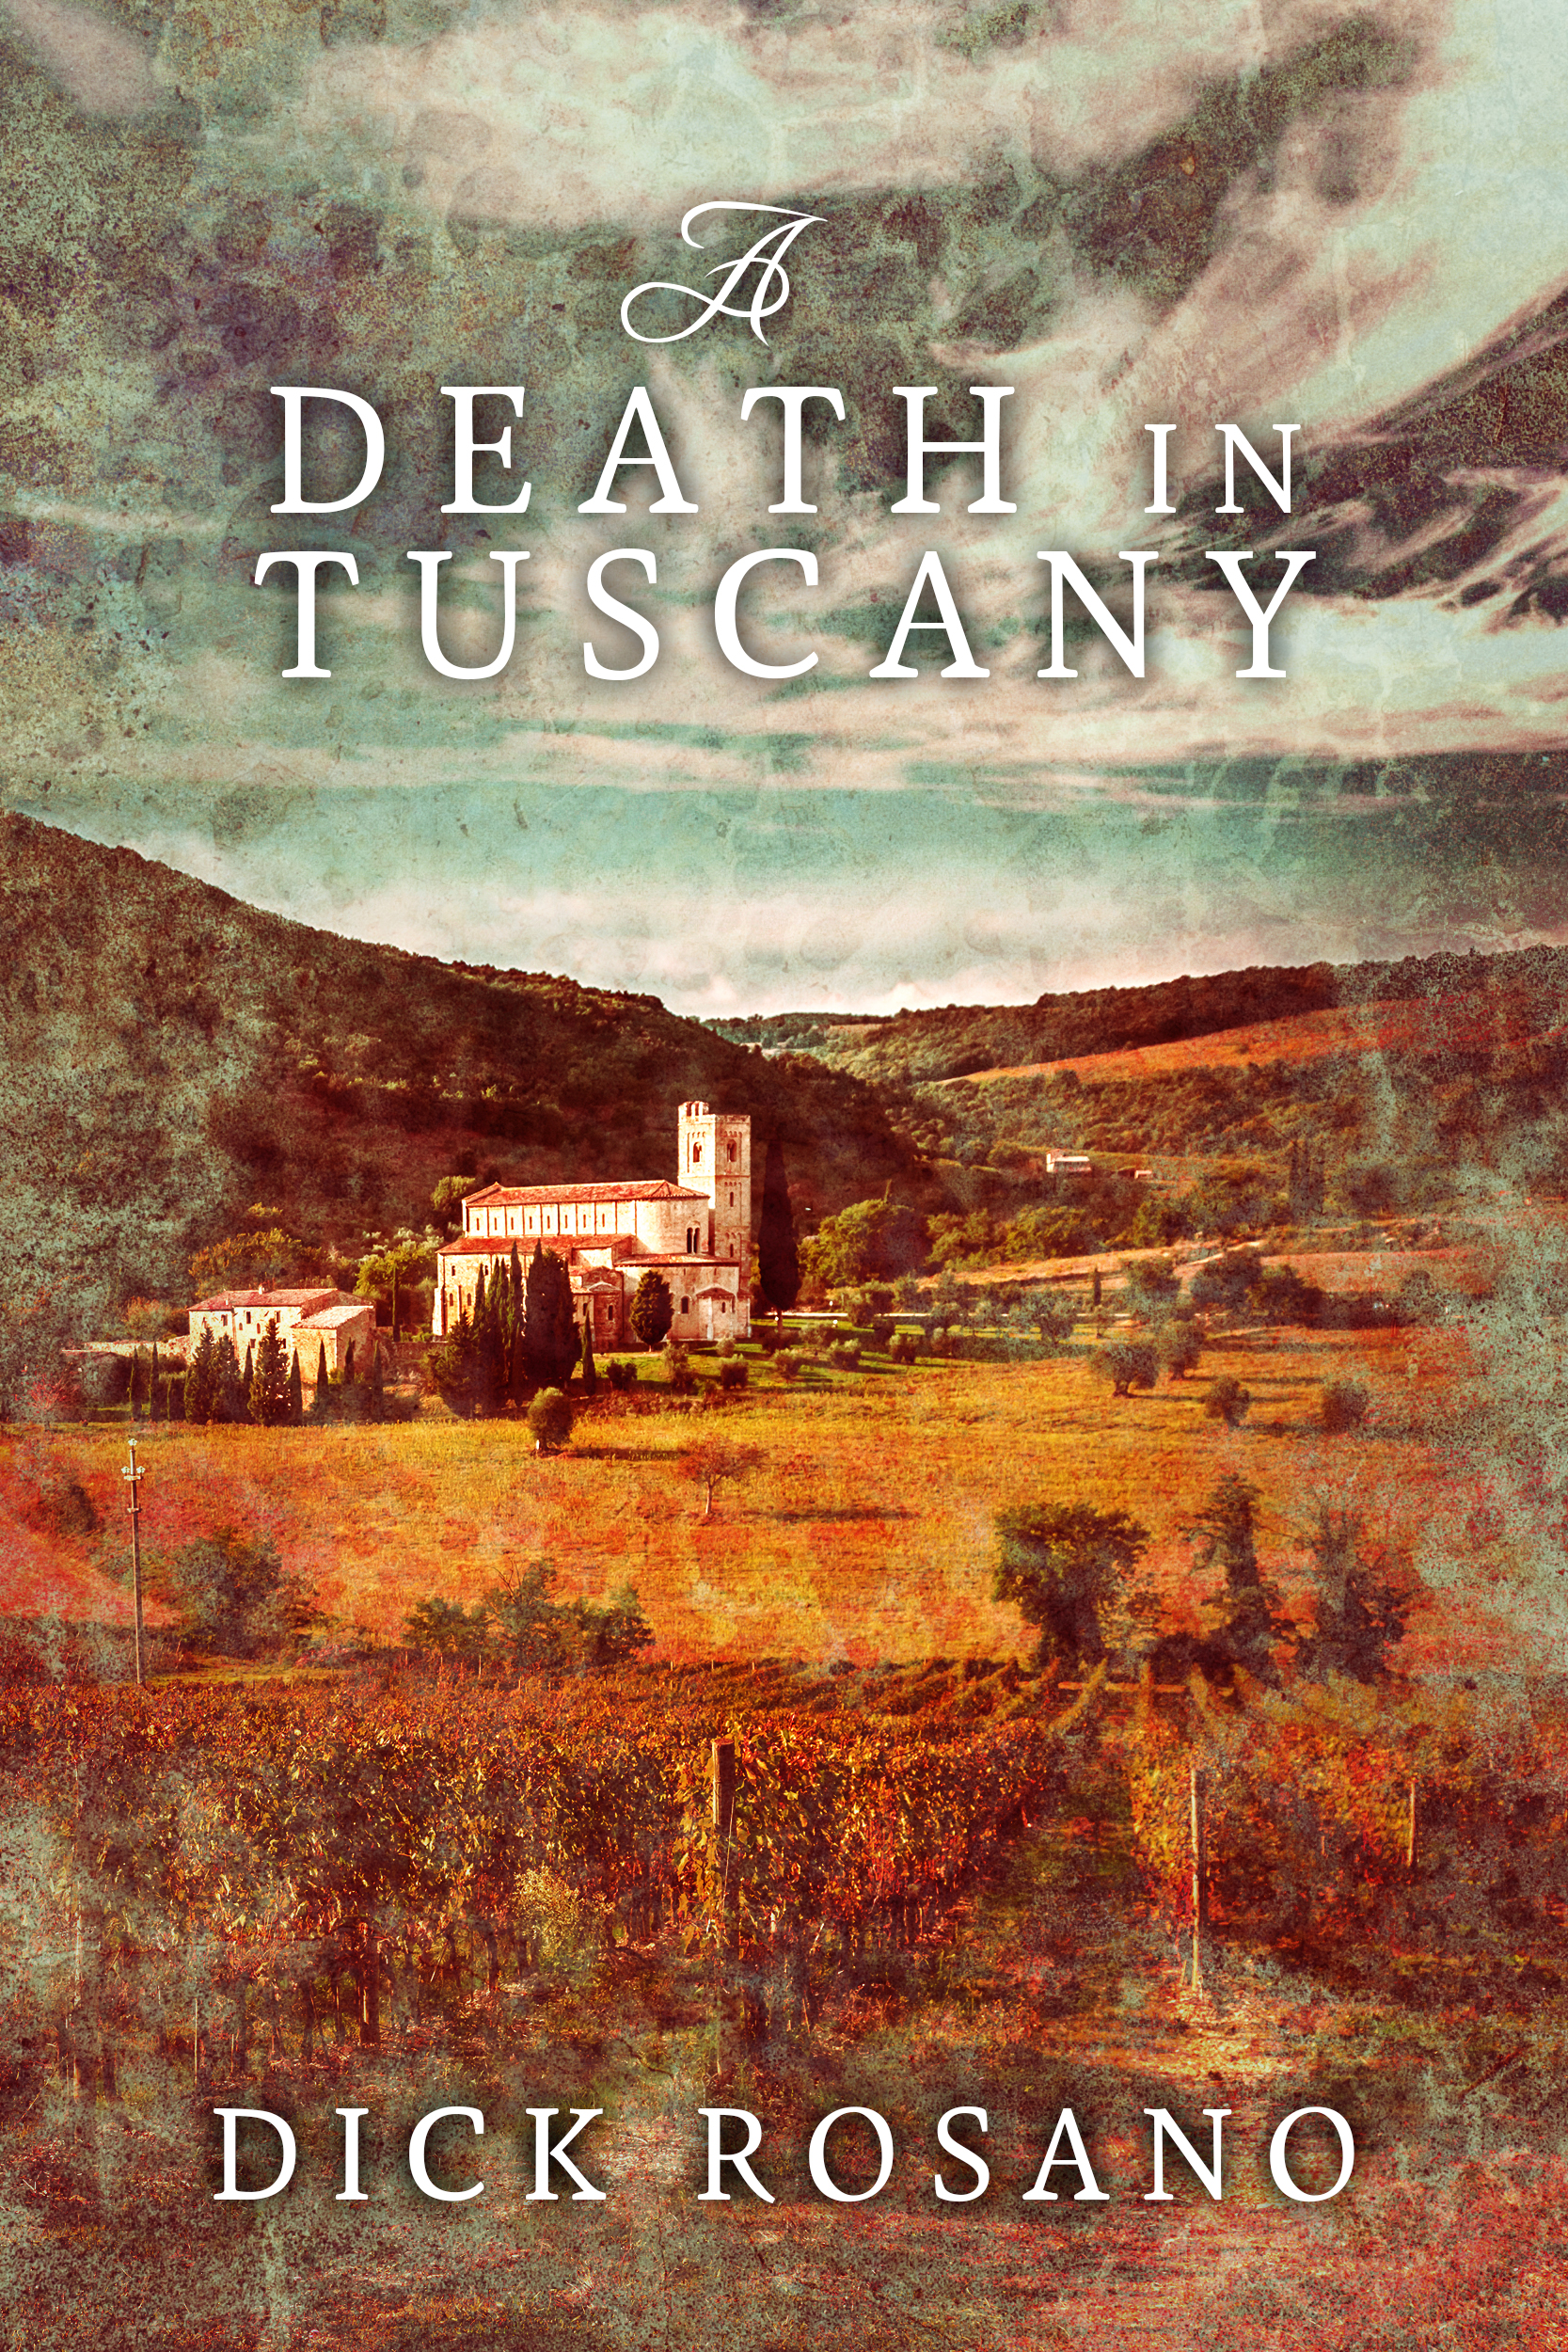 FREE: A Death in Tuscany by Dick Rosano